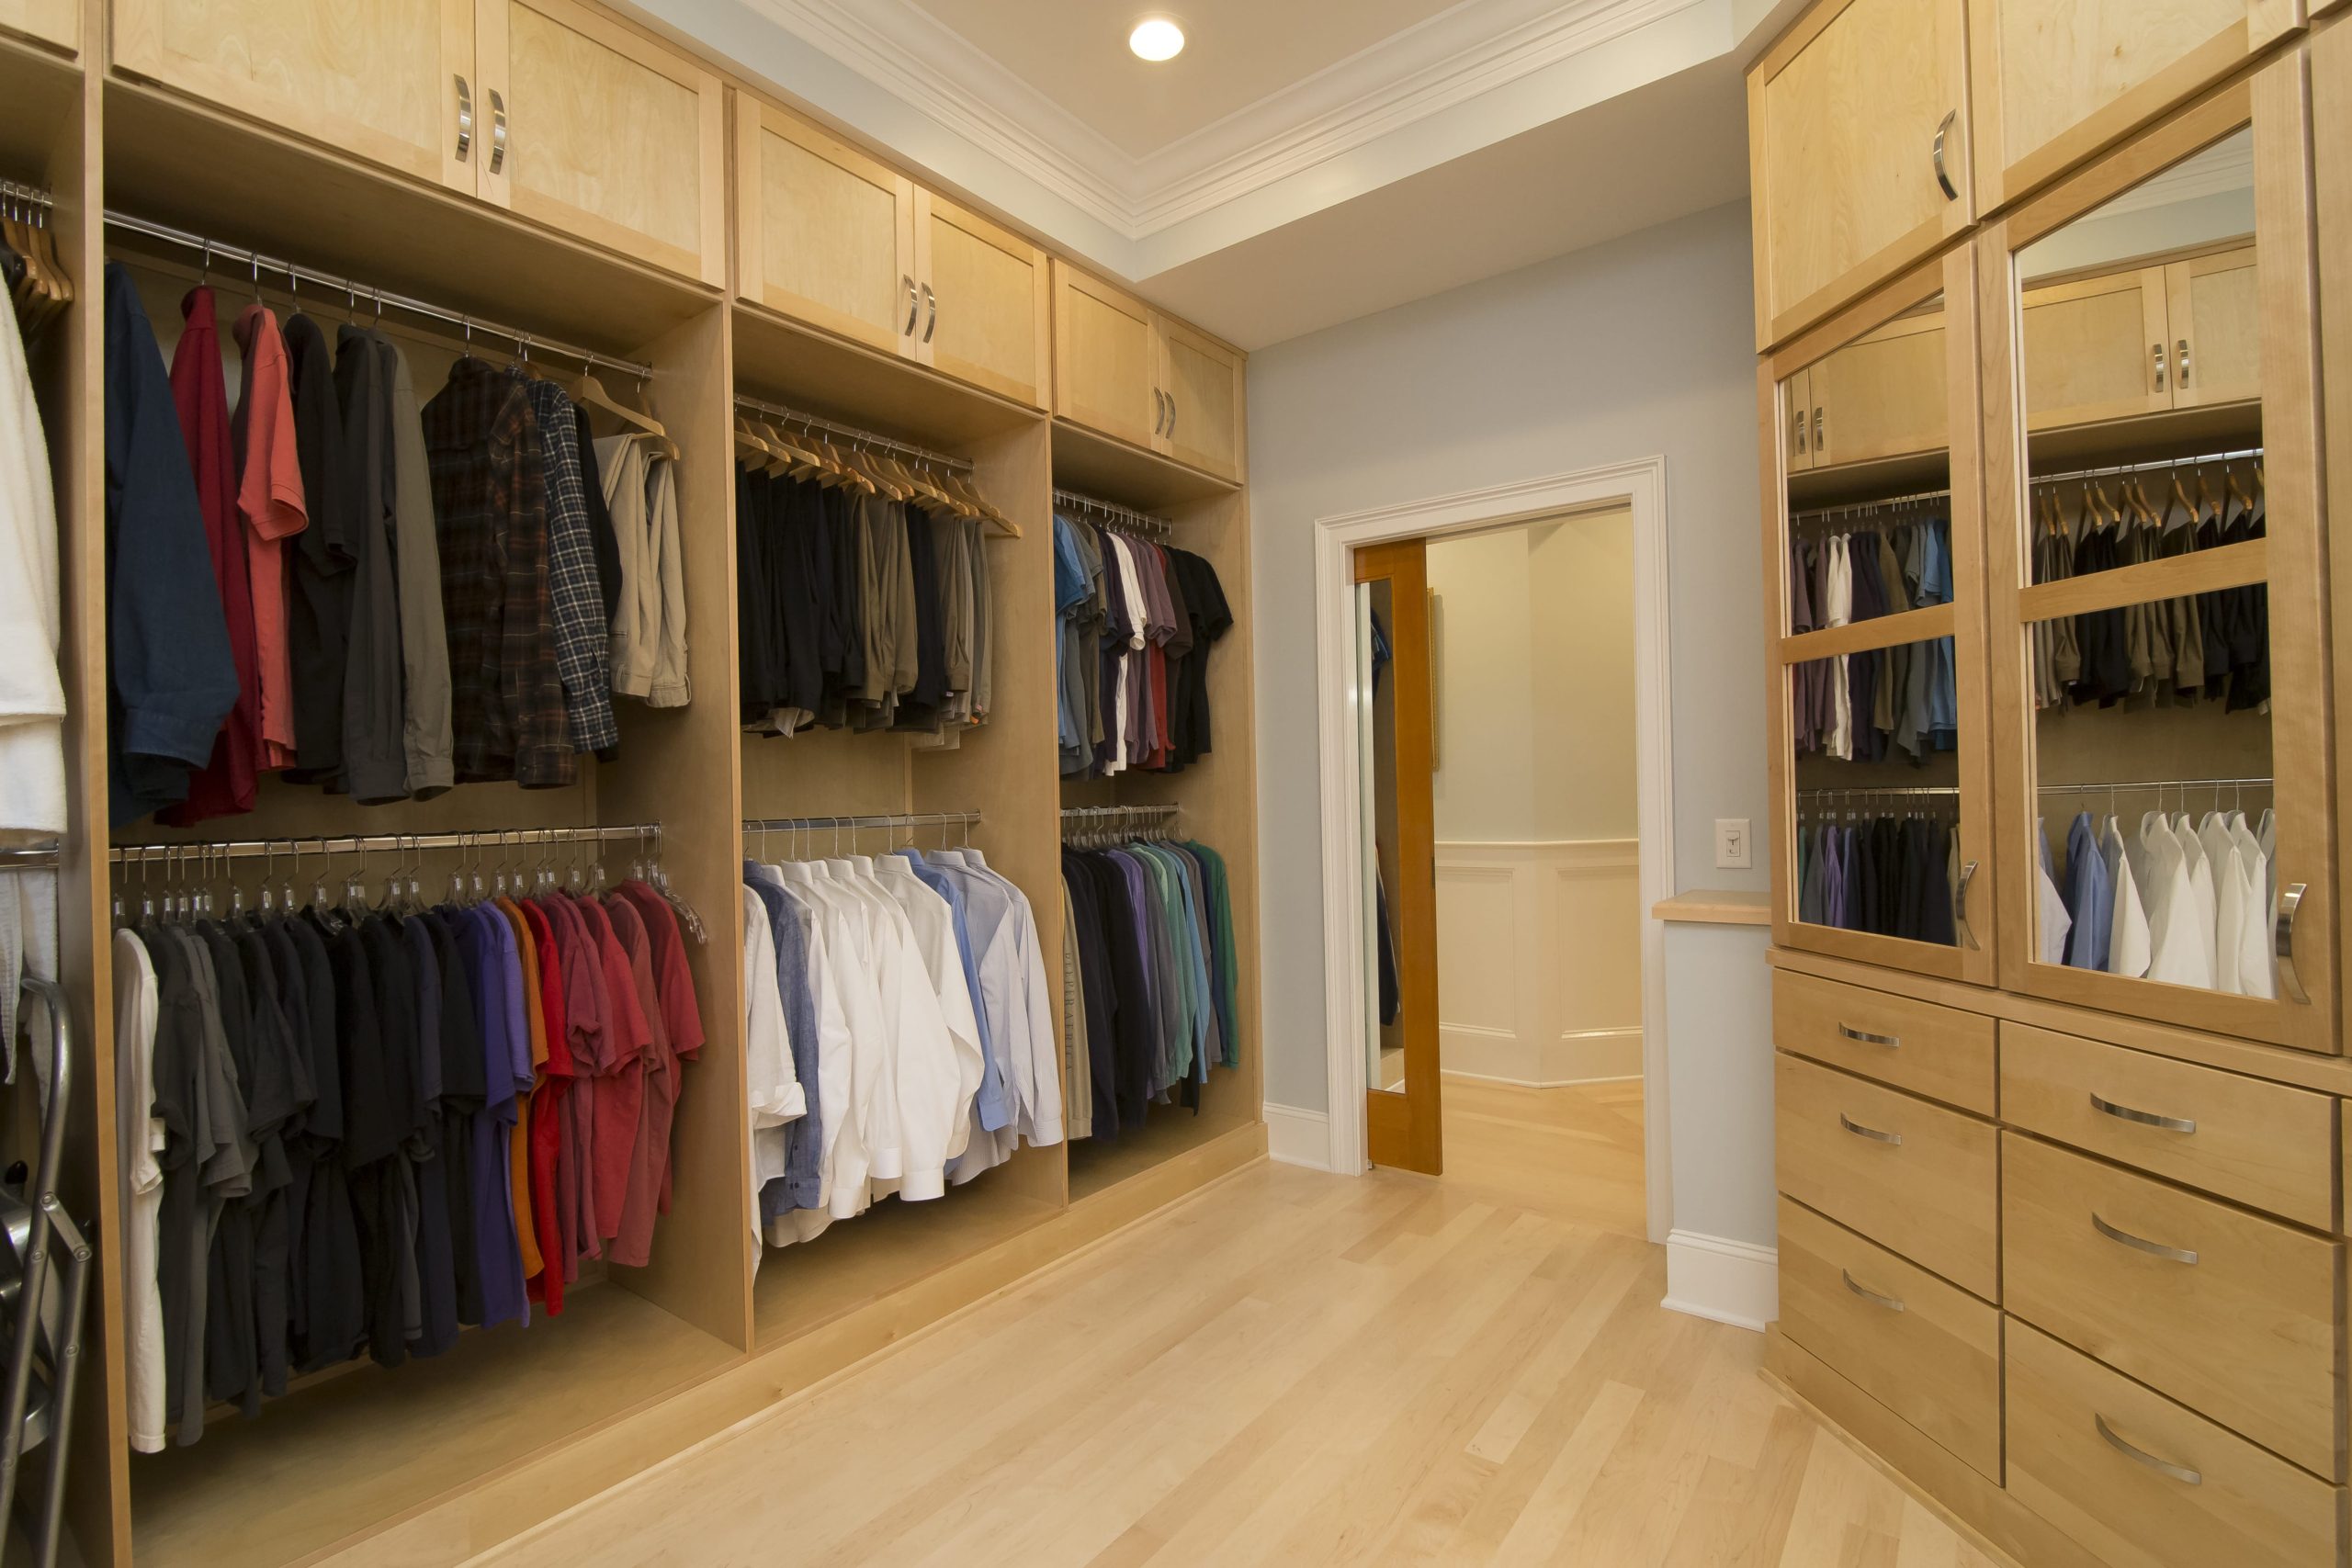 The cabinetry and floor of the primary closet are a matching light colored wood, creating a peaceful, monochromatic palette in the space.